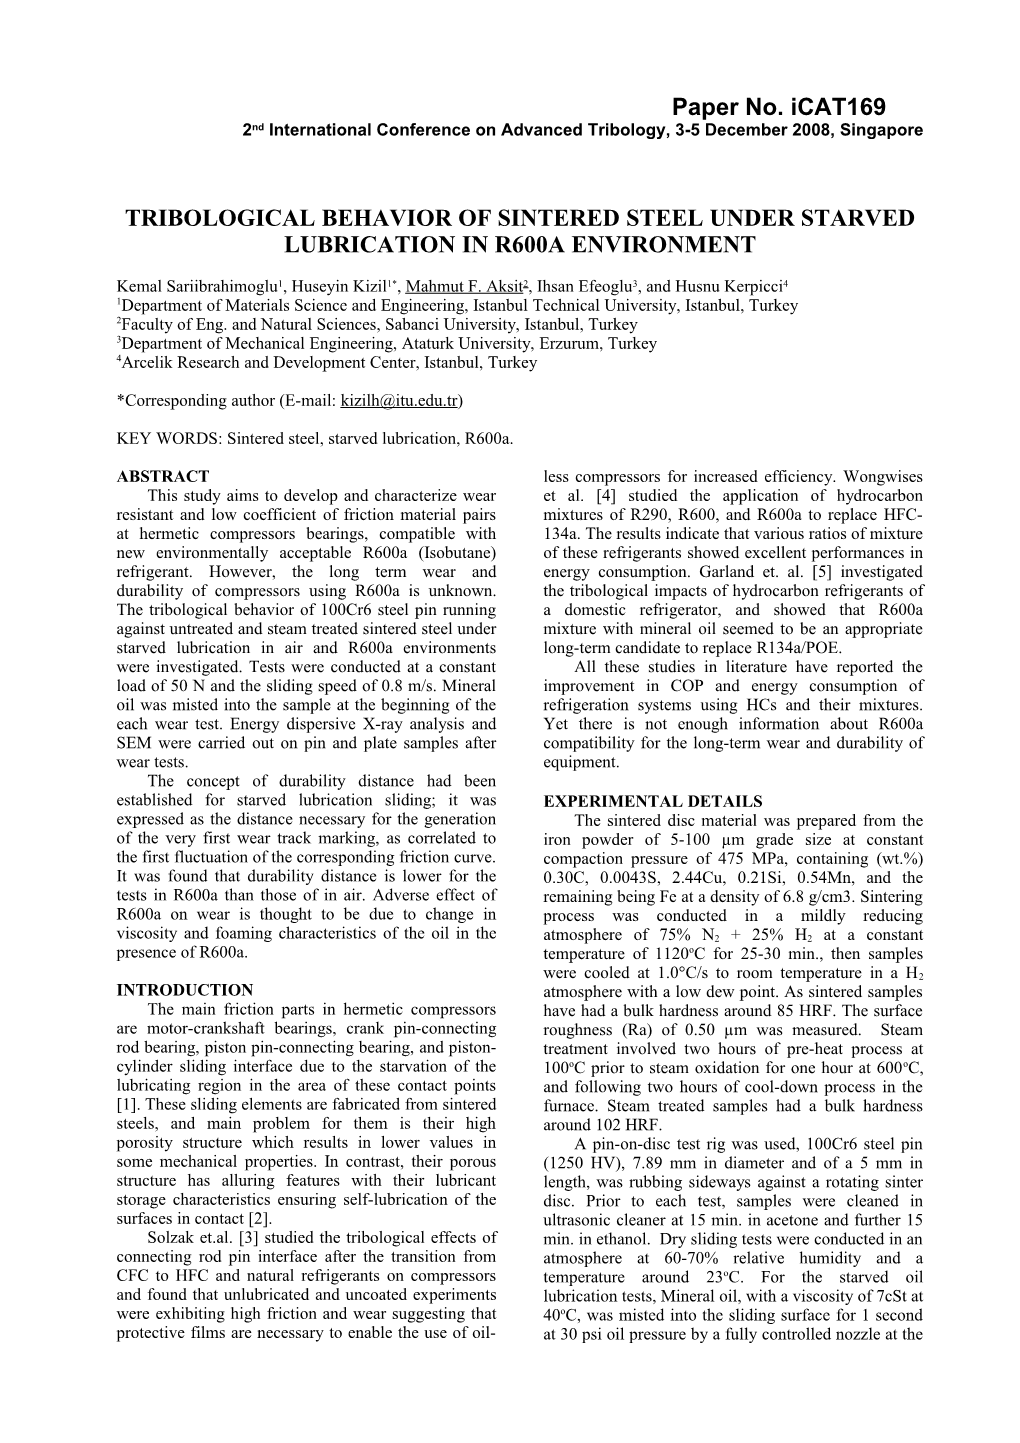 Tribological Behavior of Sintered Steel Under Starved Lubrication in R600a Environment